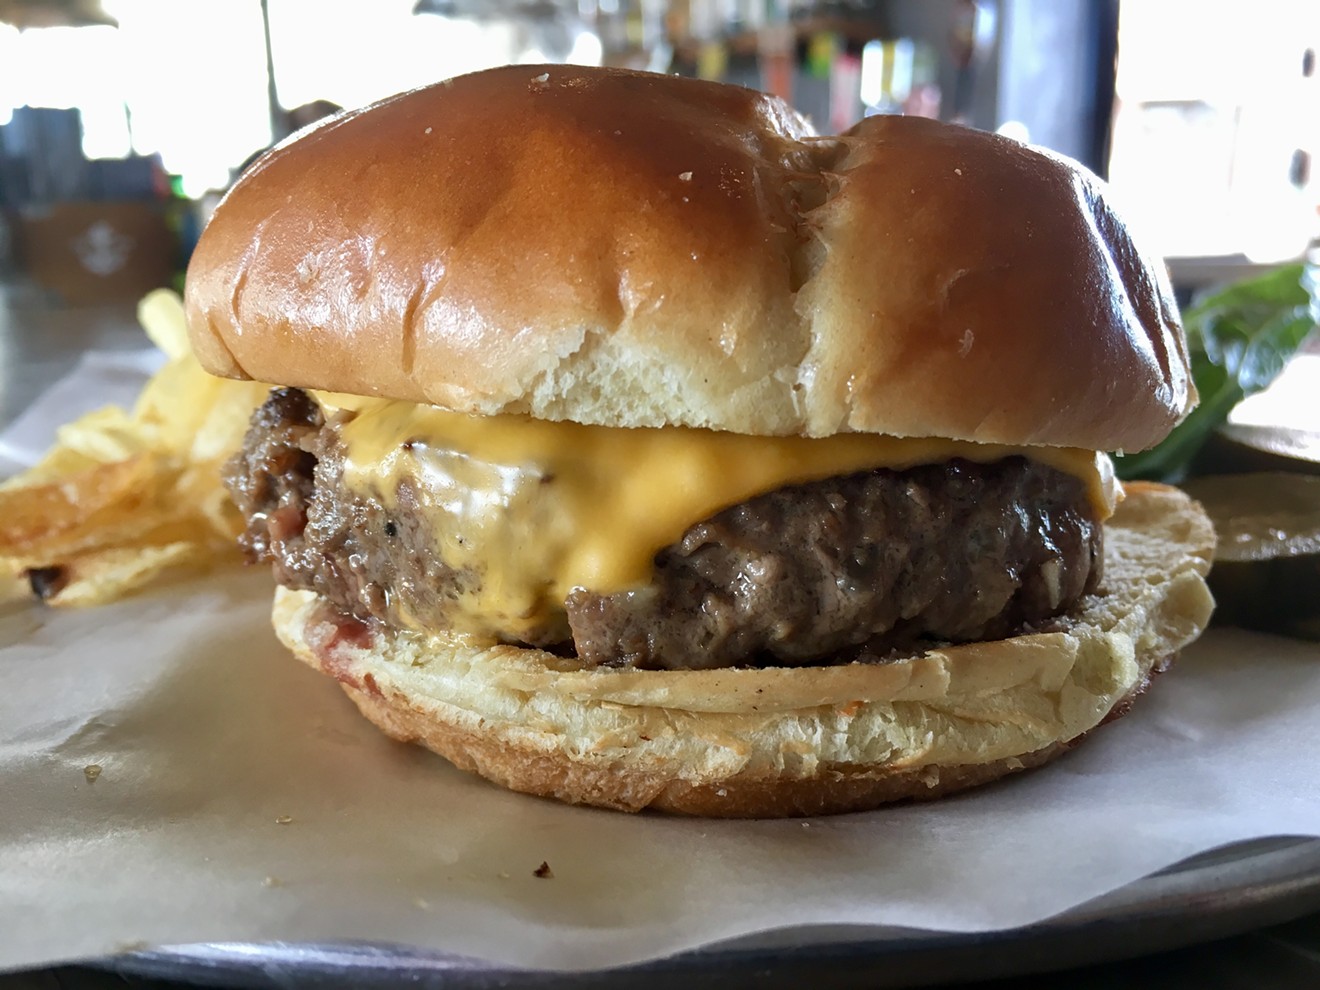 The single cheeseburger at Cold Beer Co., with a Wagyu-style beef patty that's been blended with bacon, is $8.